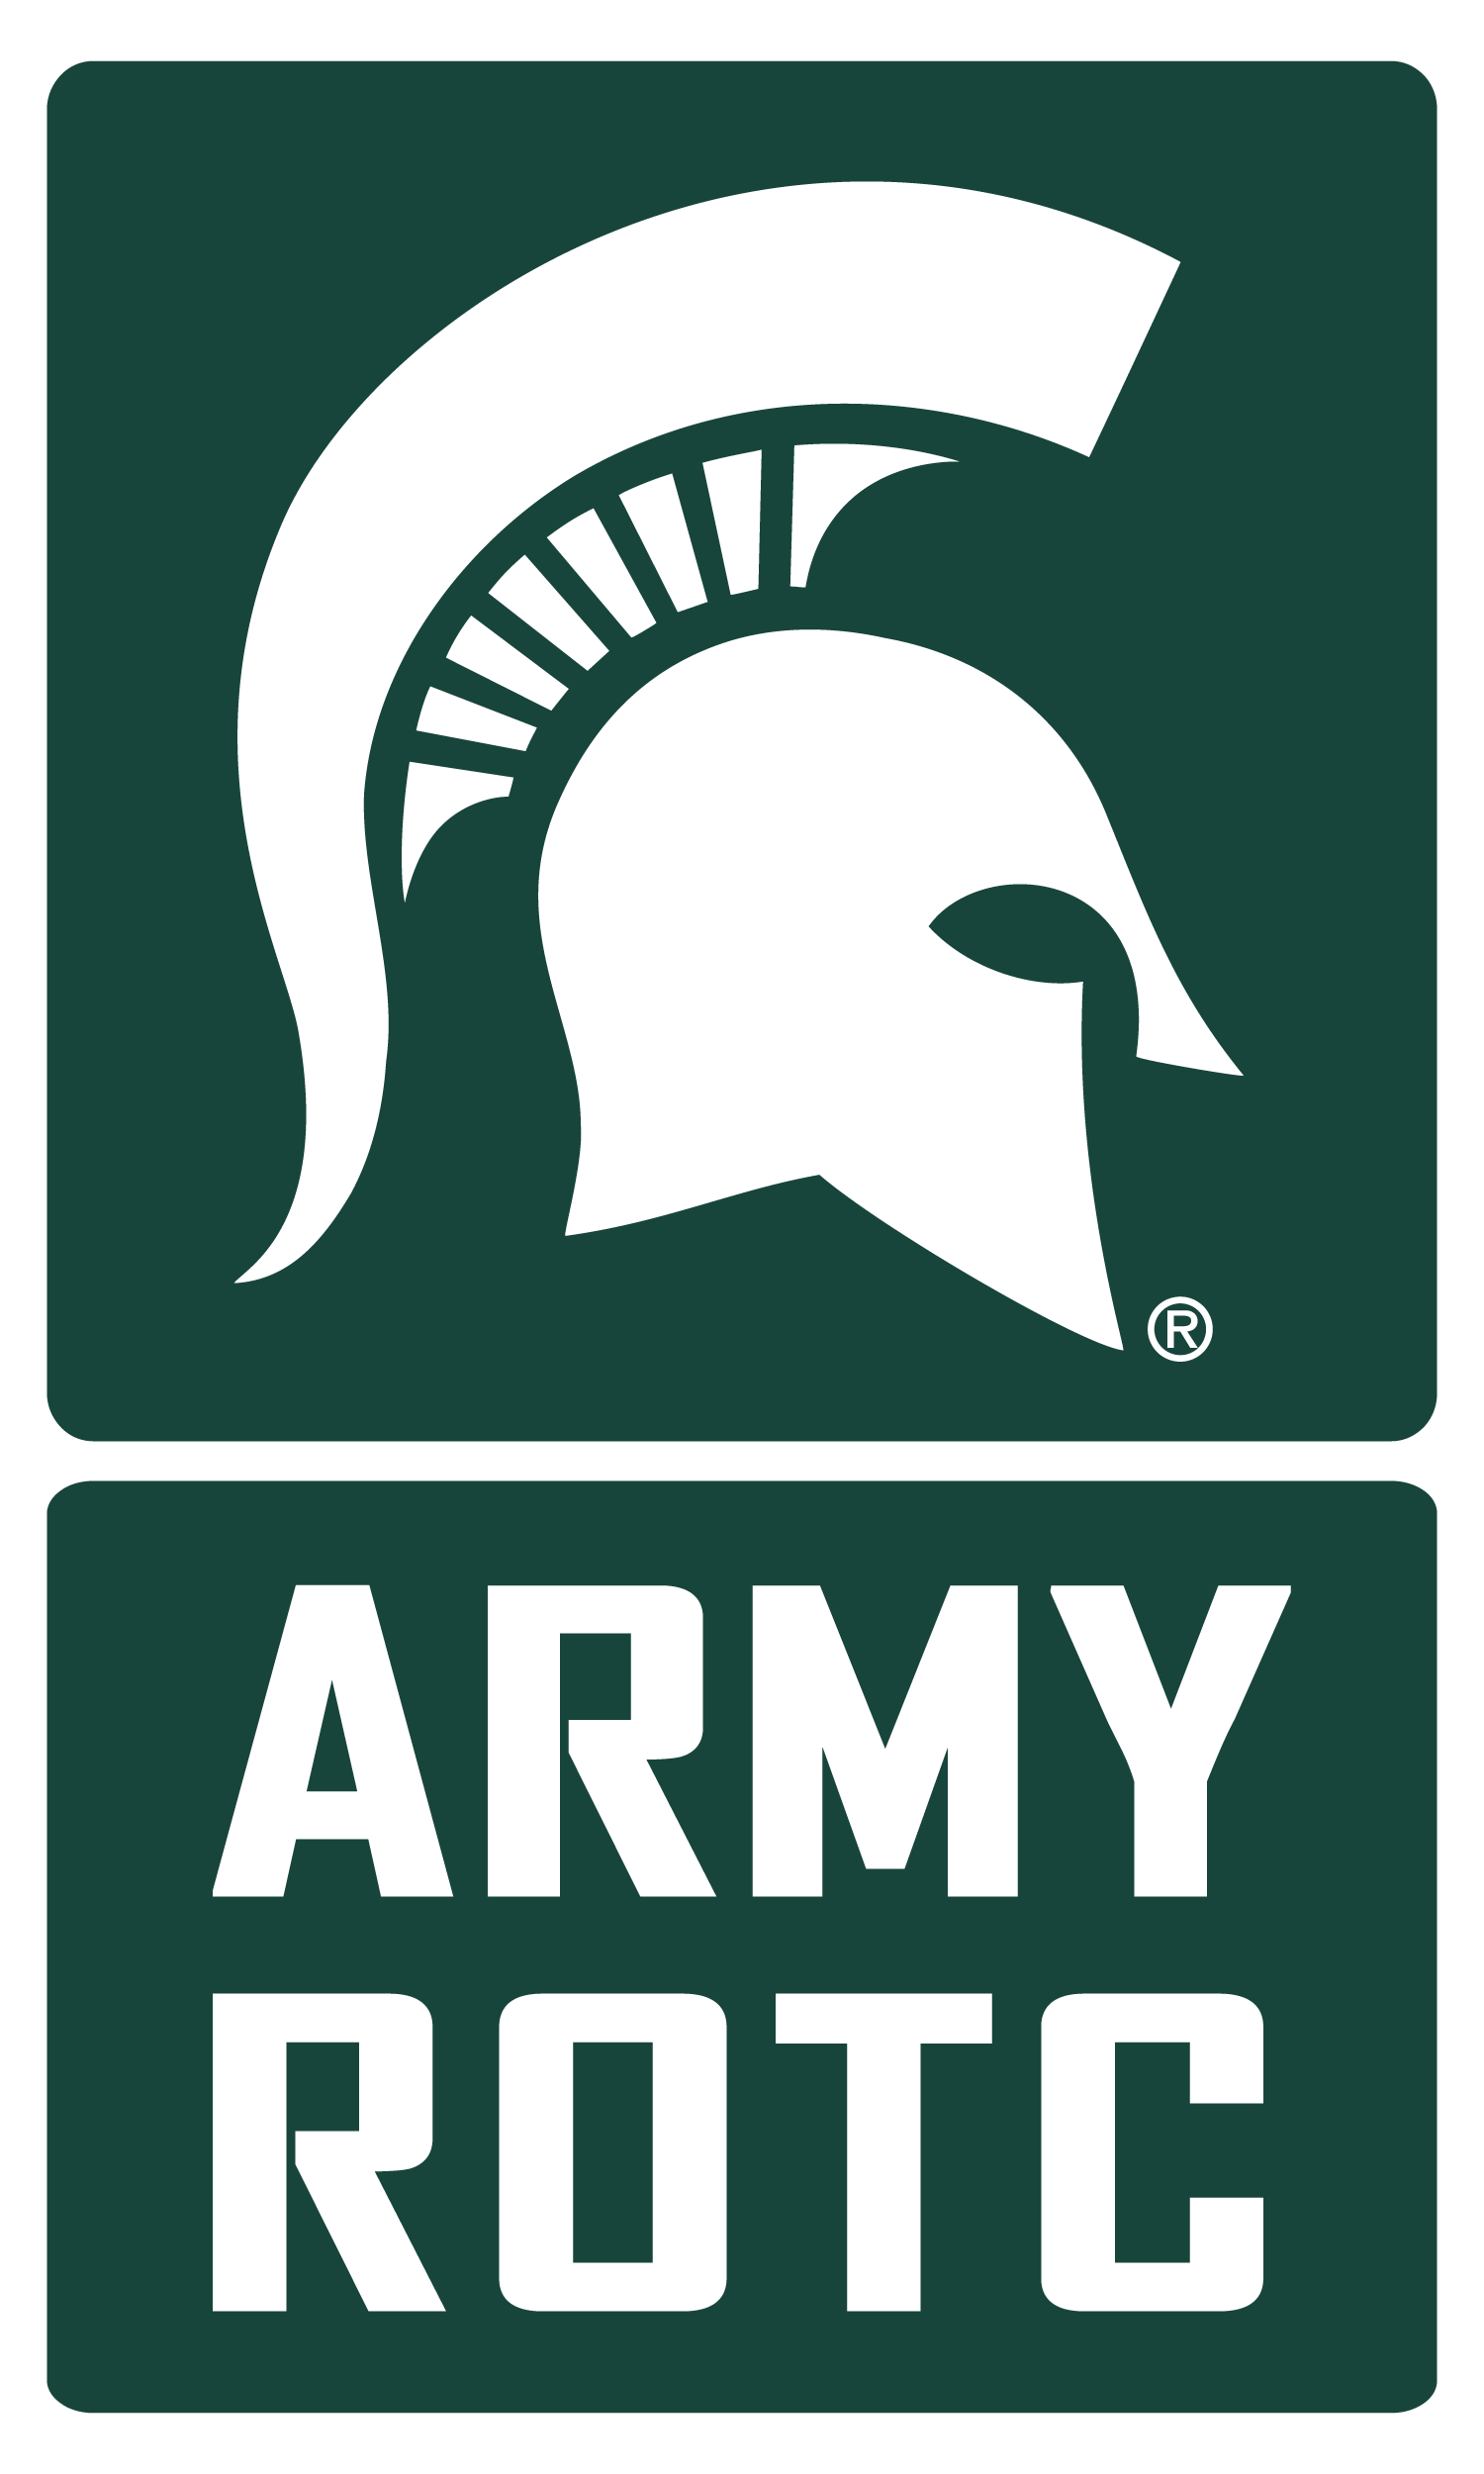 Army ROTC icon on green background